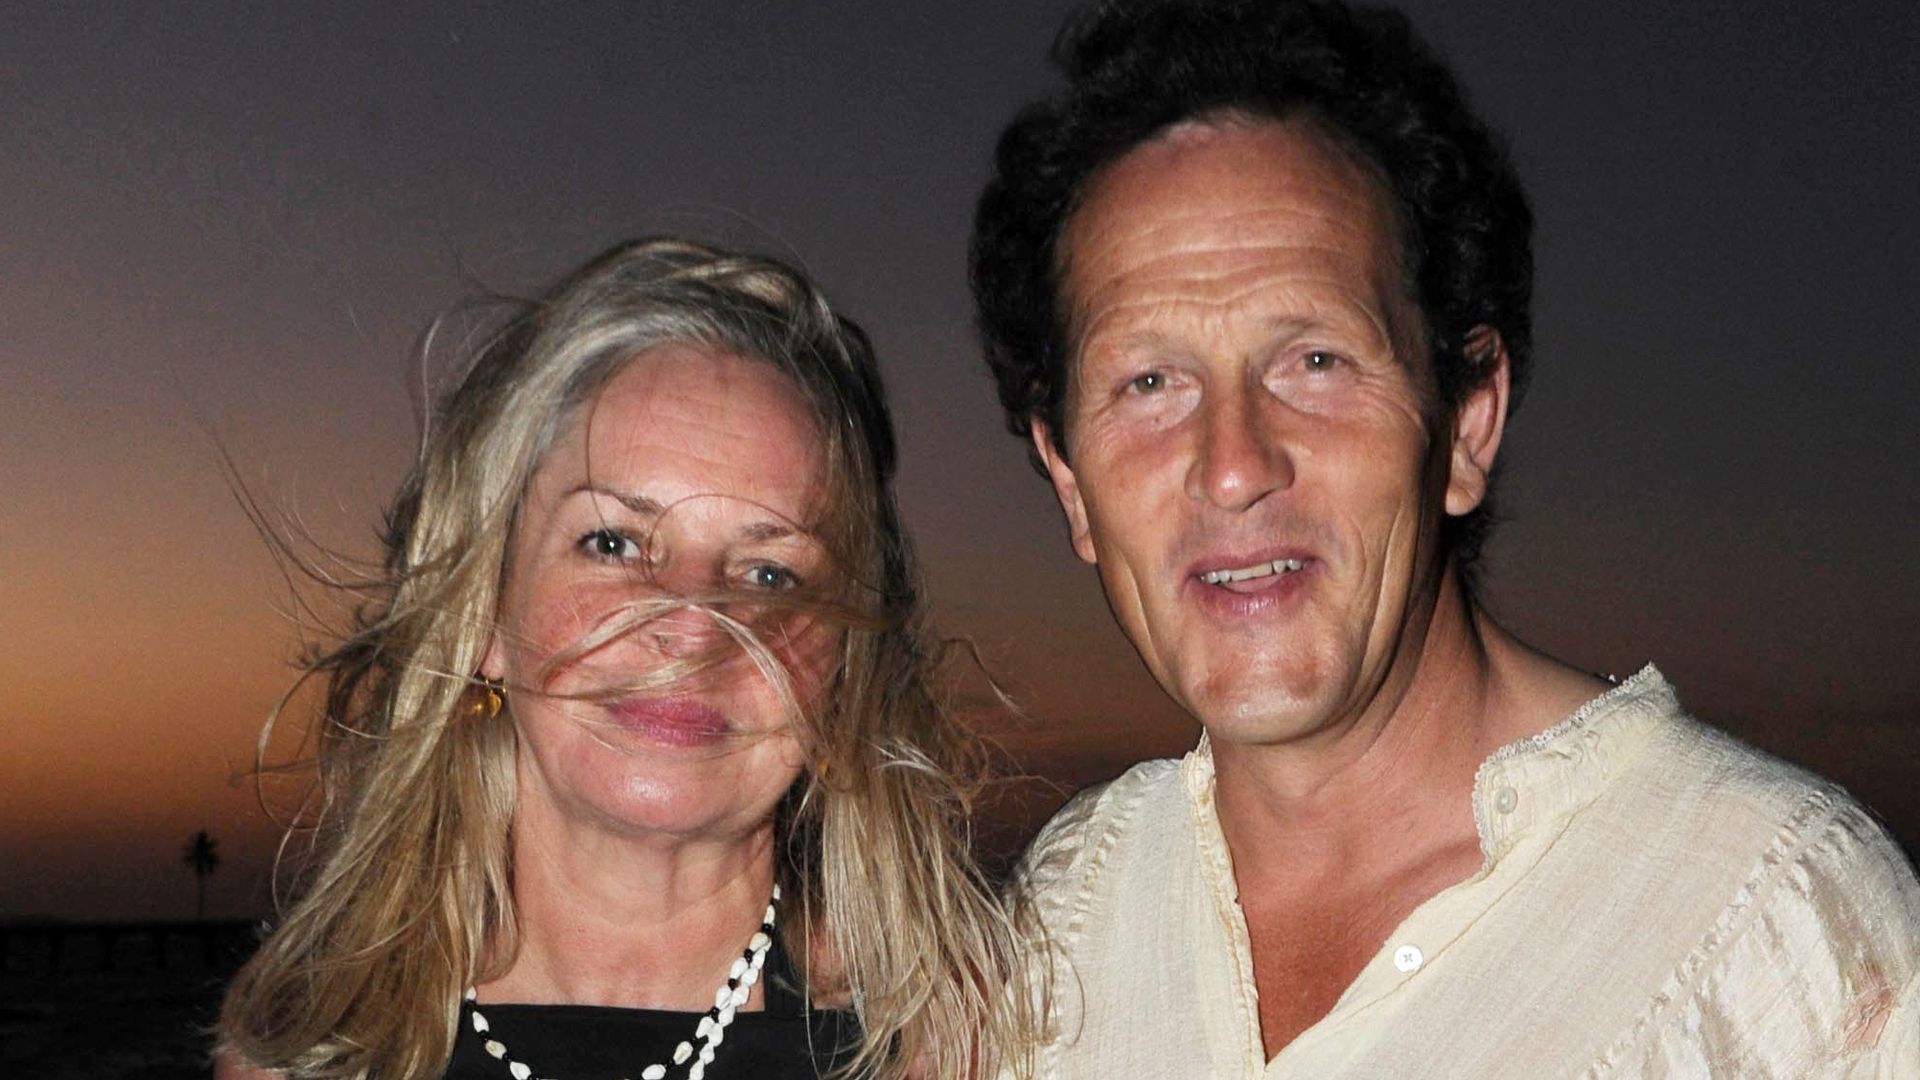 Monty Don and wife Sarah at the Hay Festival party in 2010